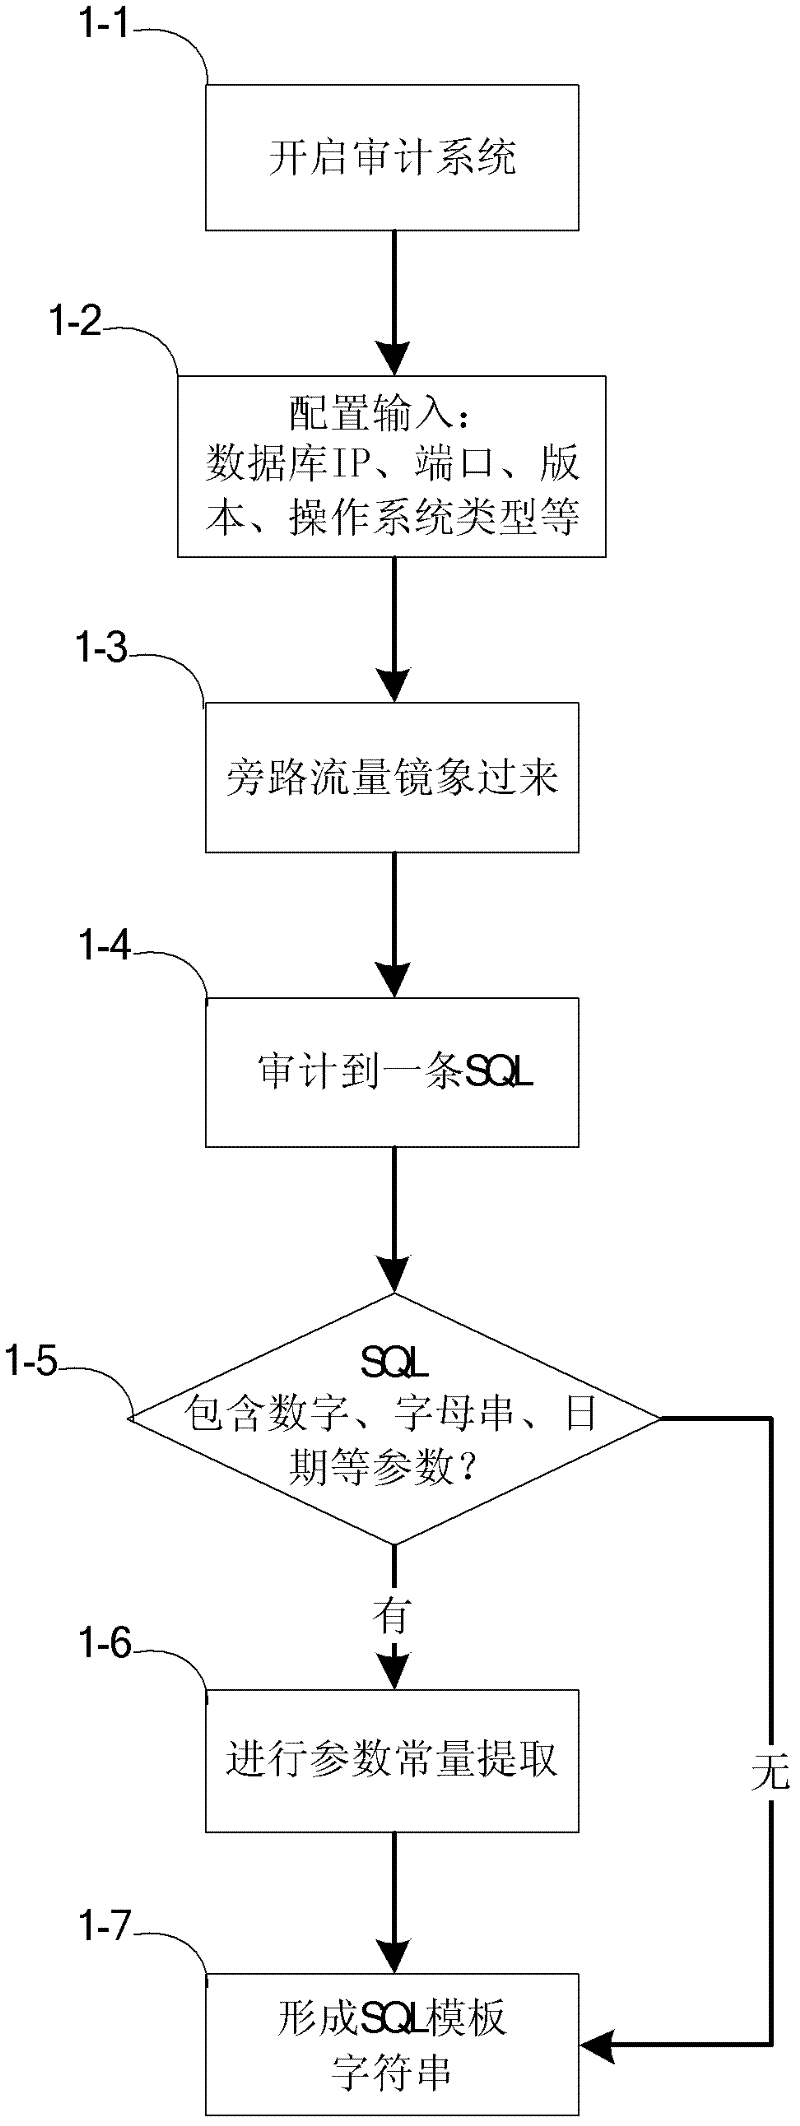 Method for compressed storage of massive SQL (structured query language) by means of extracting SQL models